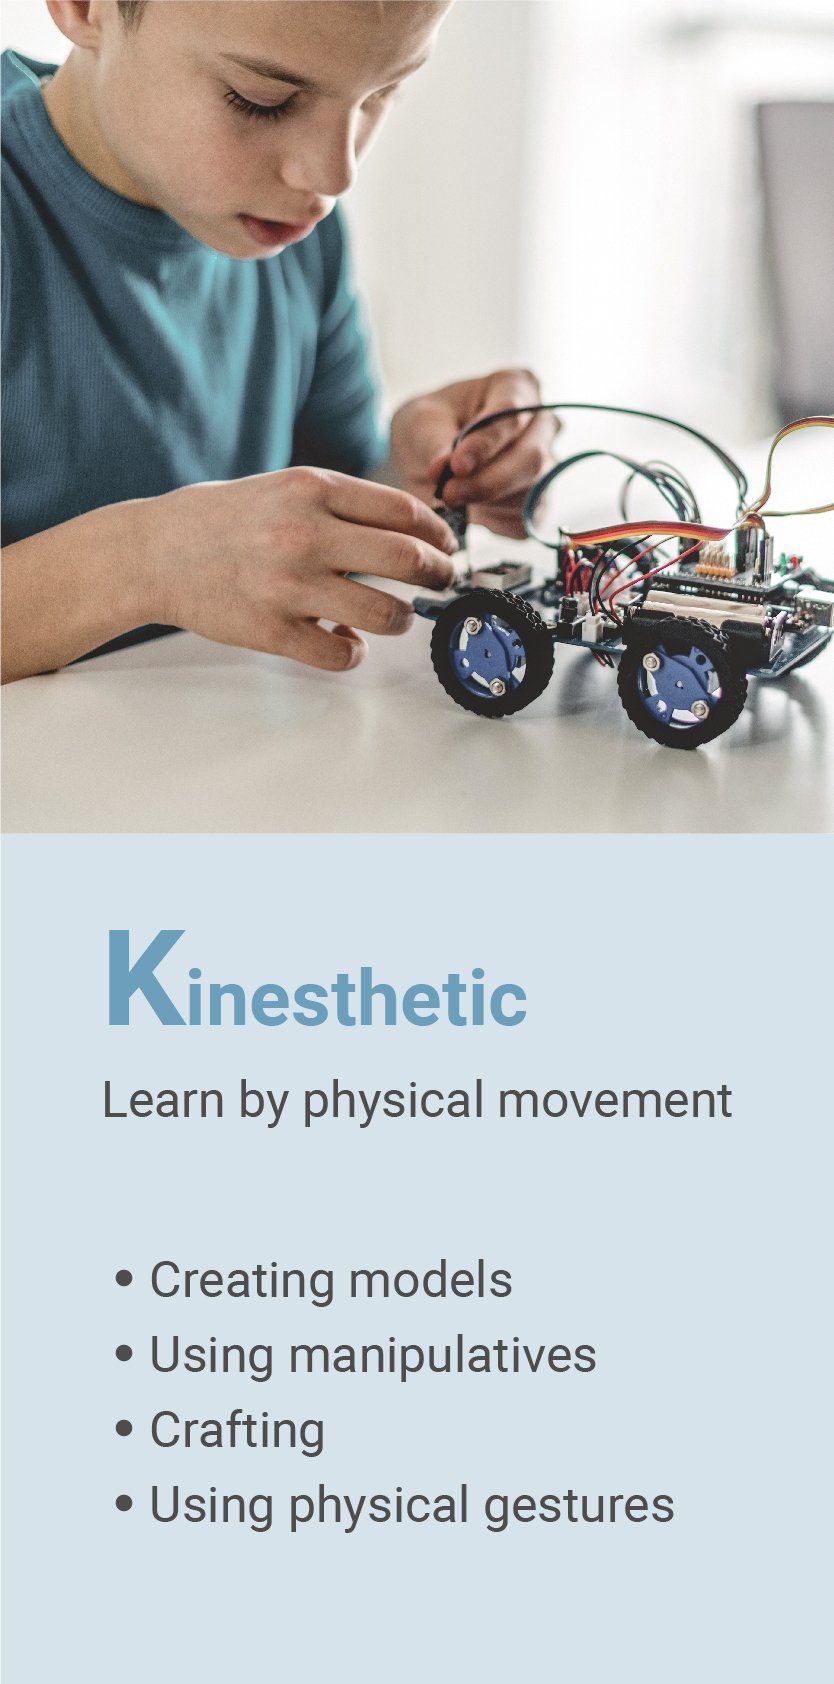 Different types of learners: Kinesthetic learners - learn by physical movement